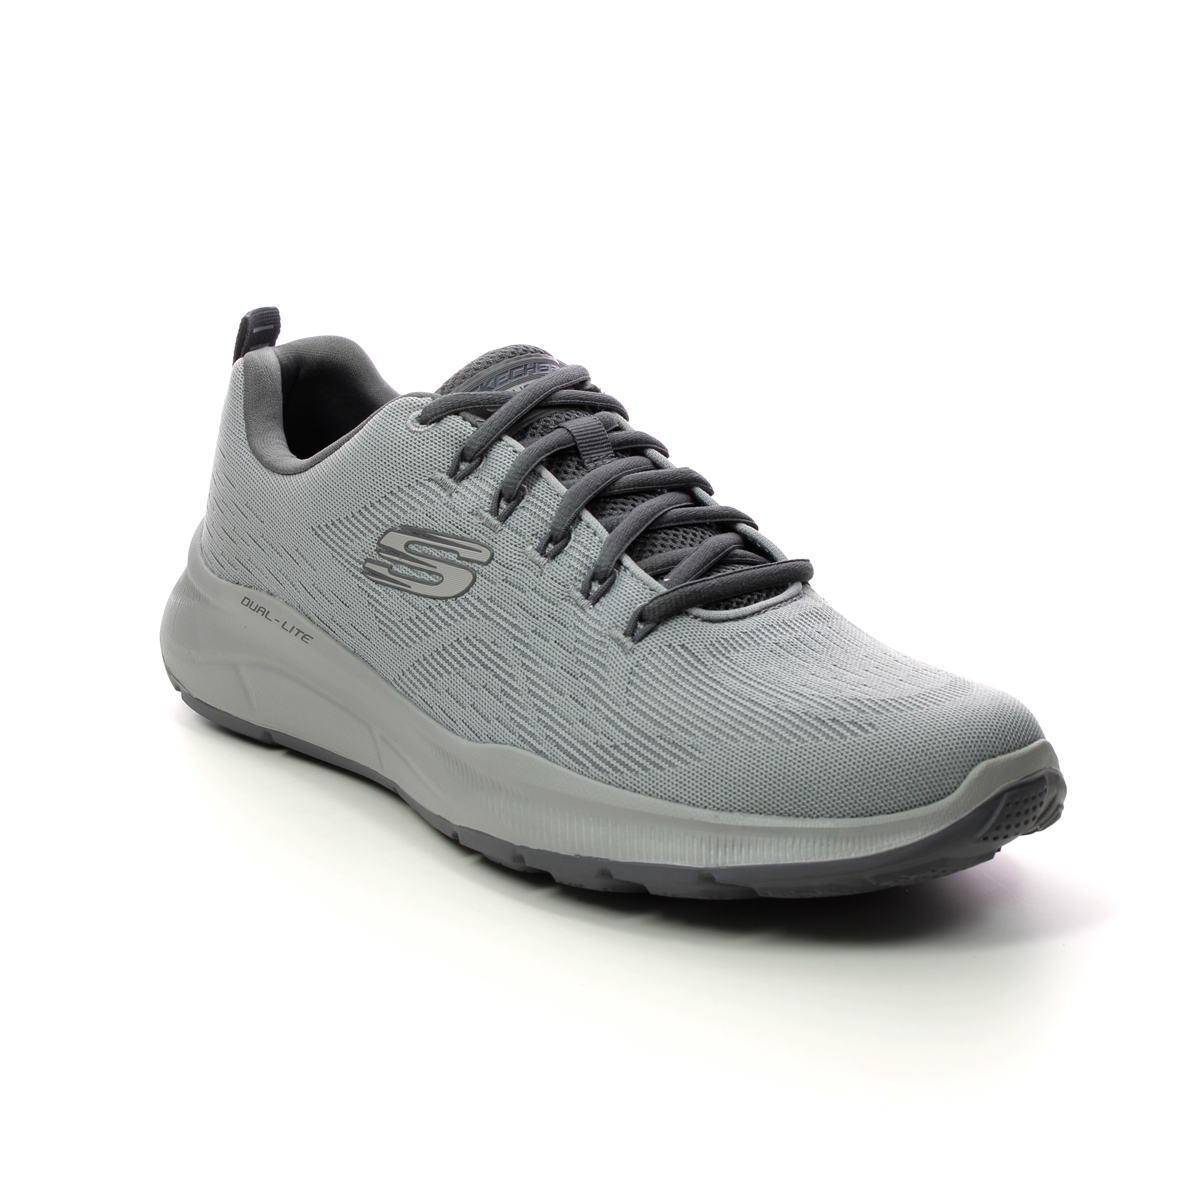 Skechers Equalizer 5 Grey Charcoal Mens Trainers 232519 In Size 8 In Plain Grey Charcoal